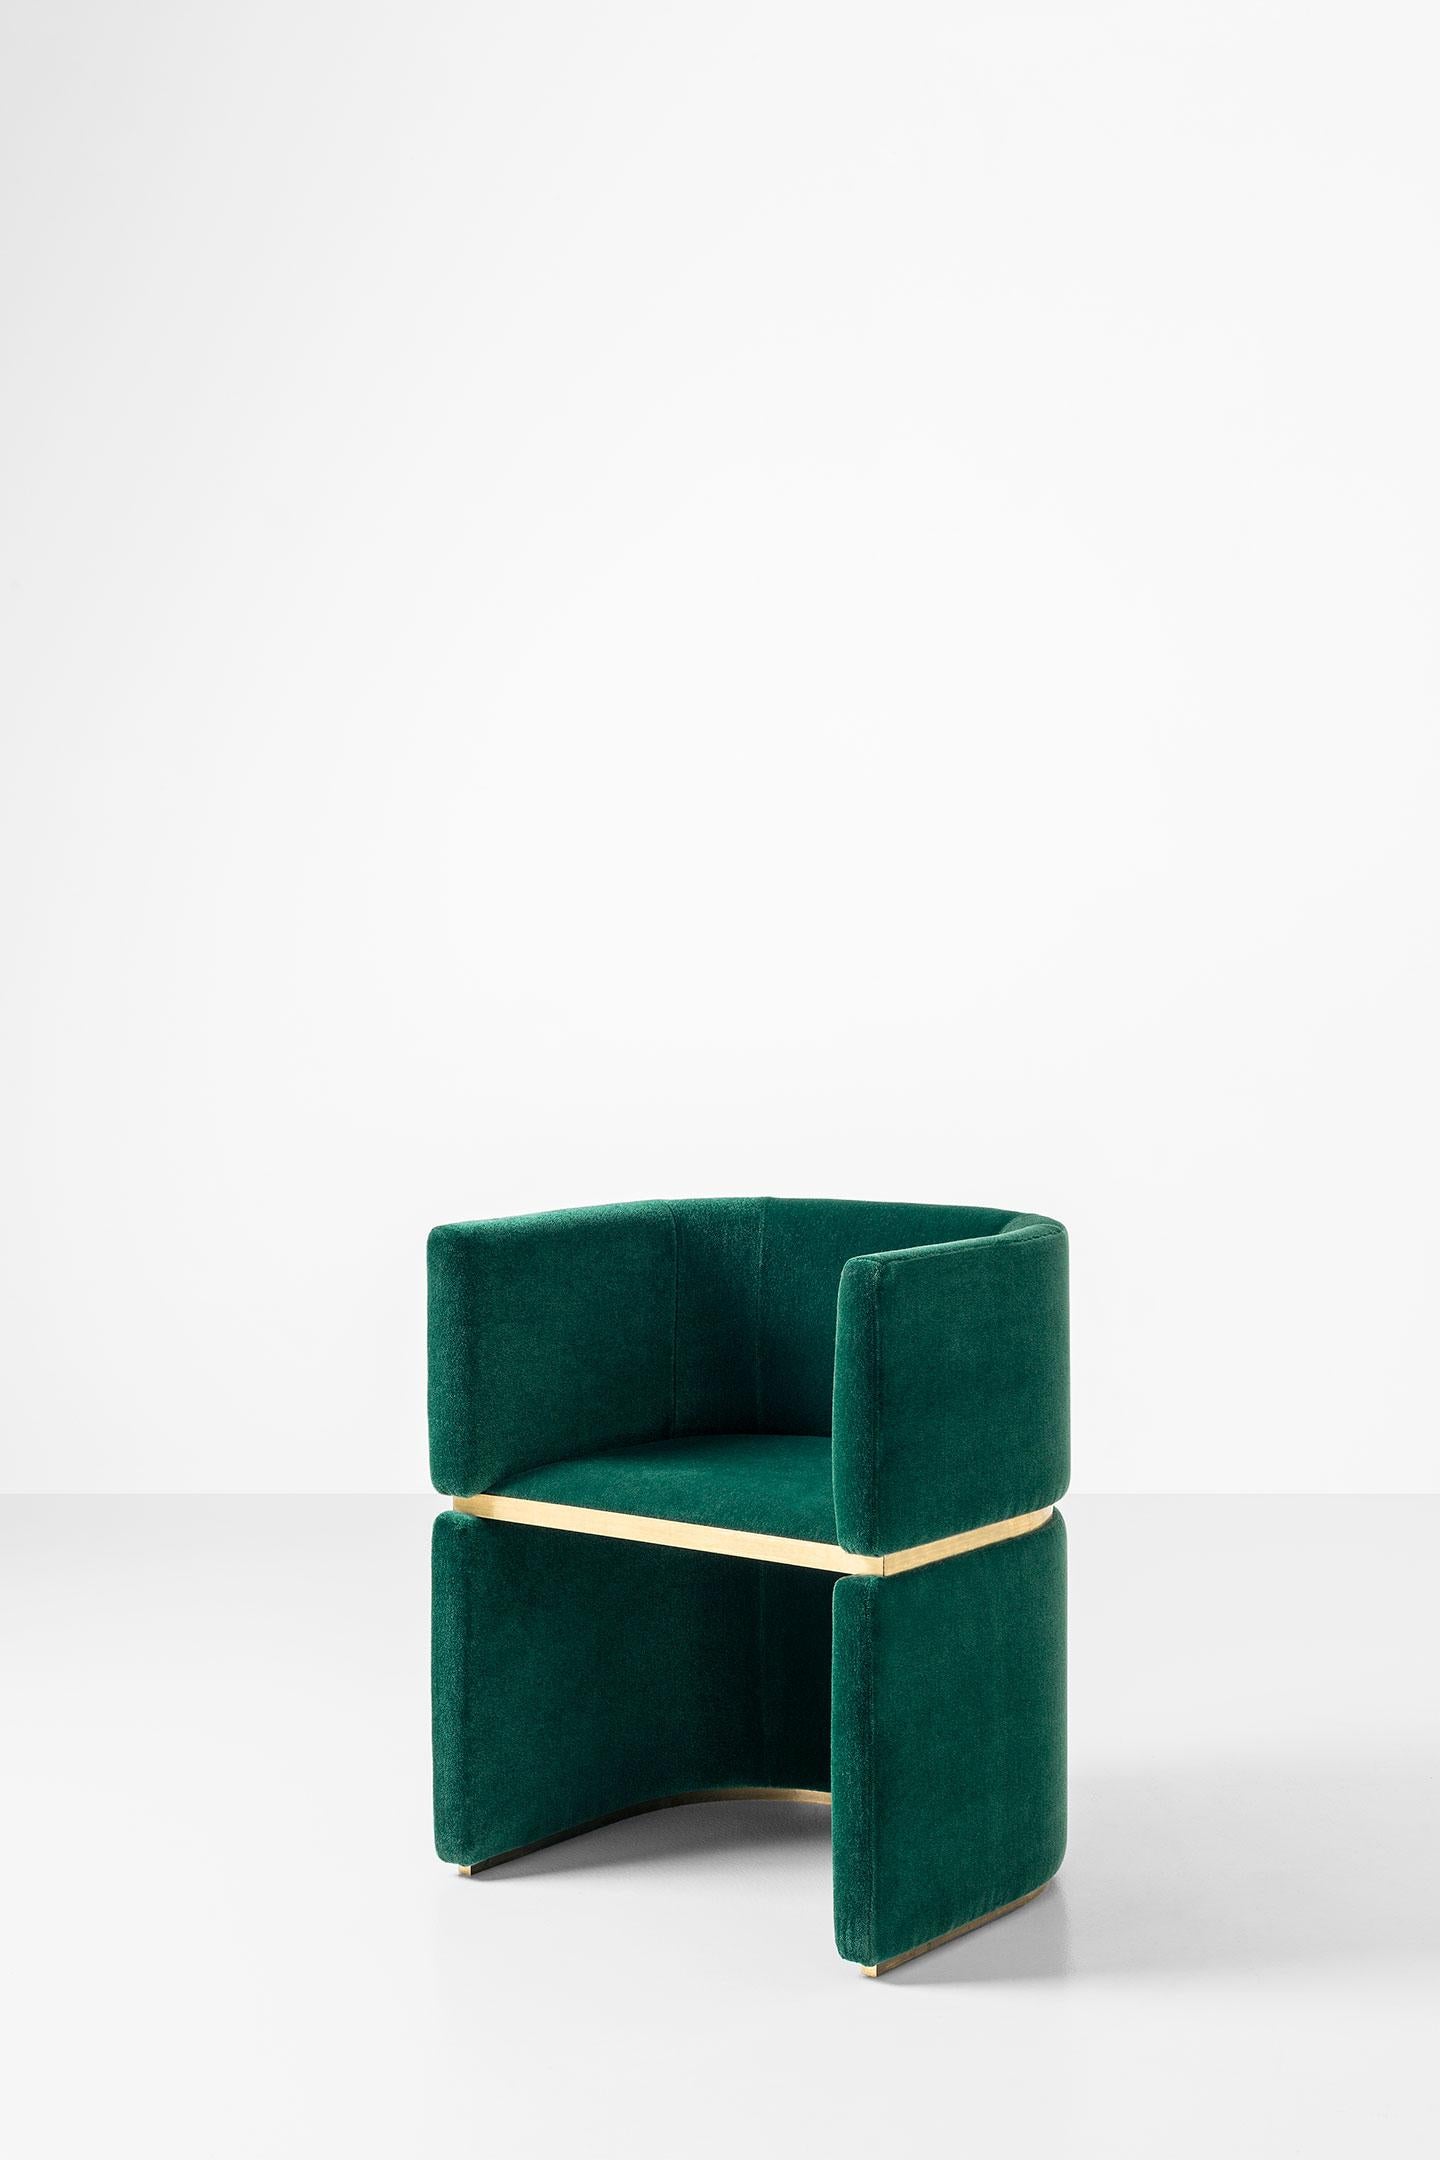 Poltroncina 072
Small padded club chair, upholstered in green mohair fabric with oxdised brass detailing.
Progetto Non Finito collection.